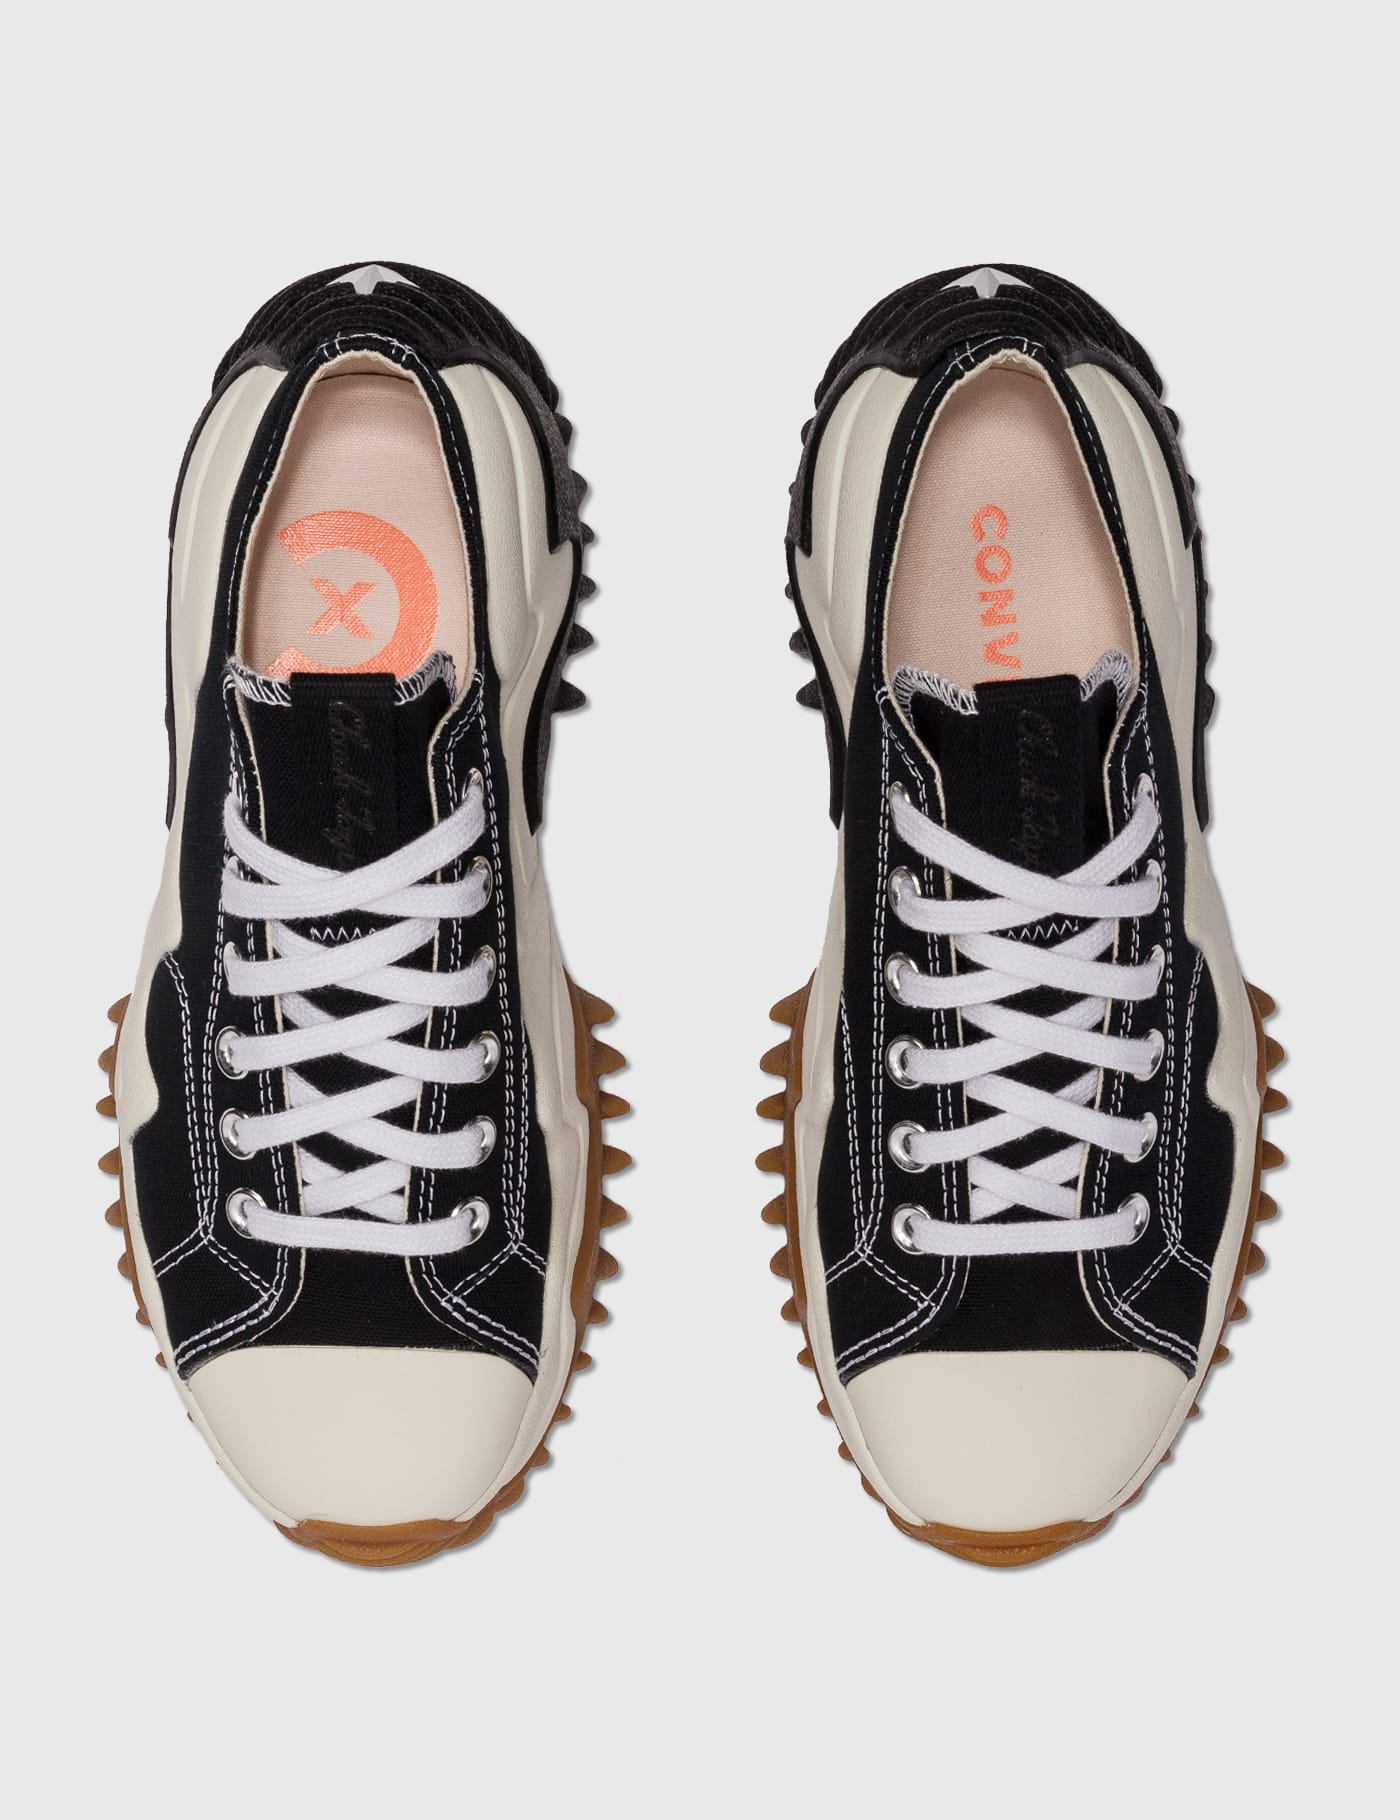 Converse - Run Star Motion | HBX - Globally Curated Fashion and 